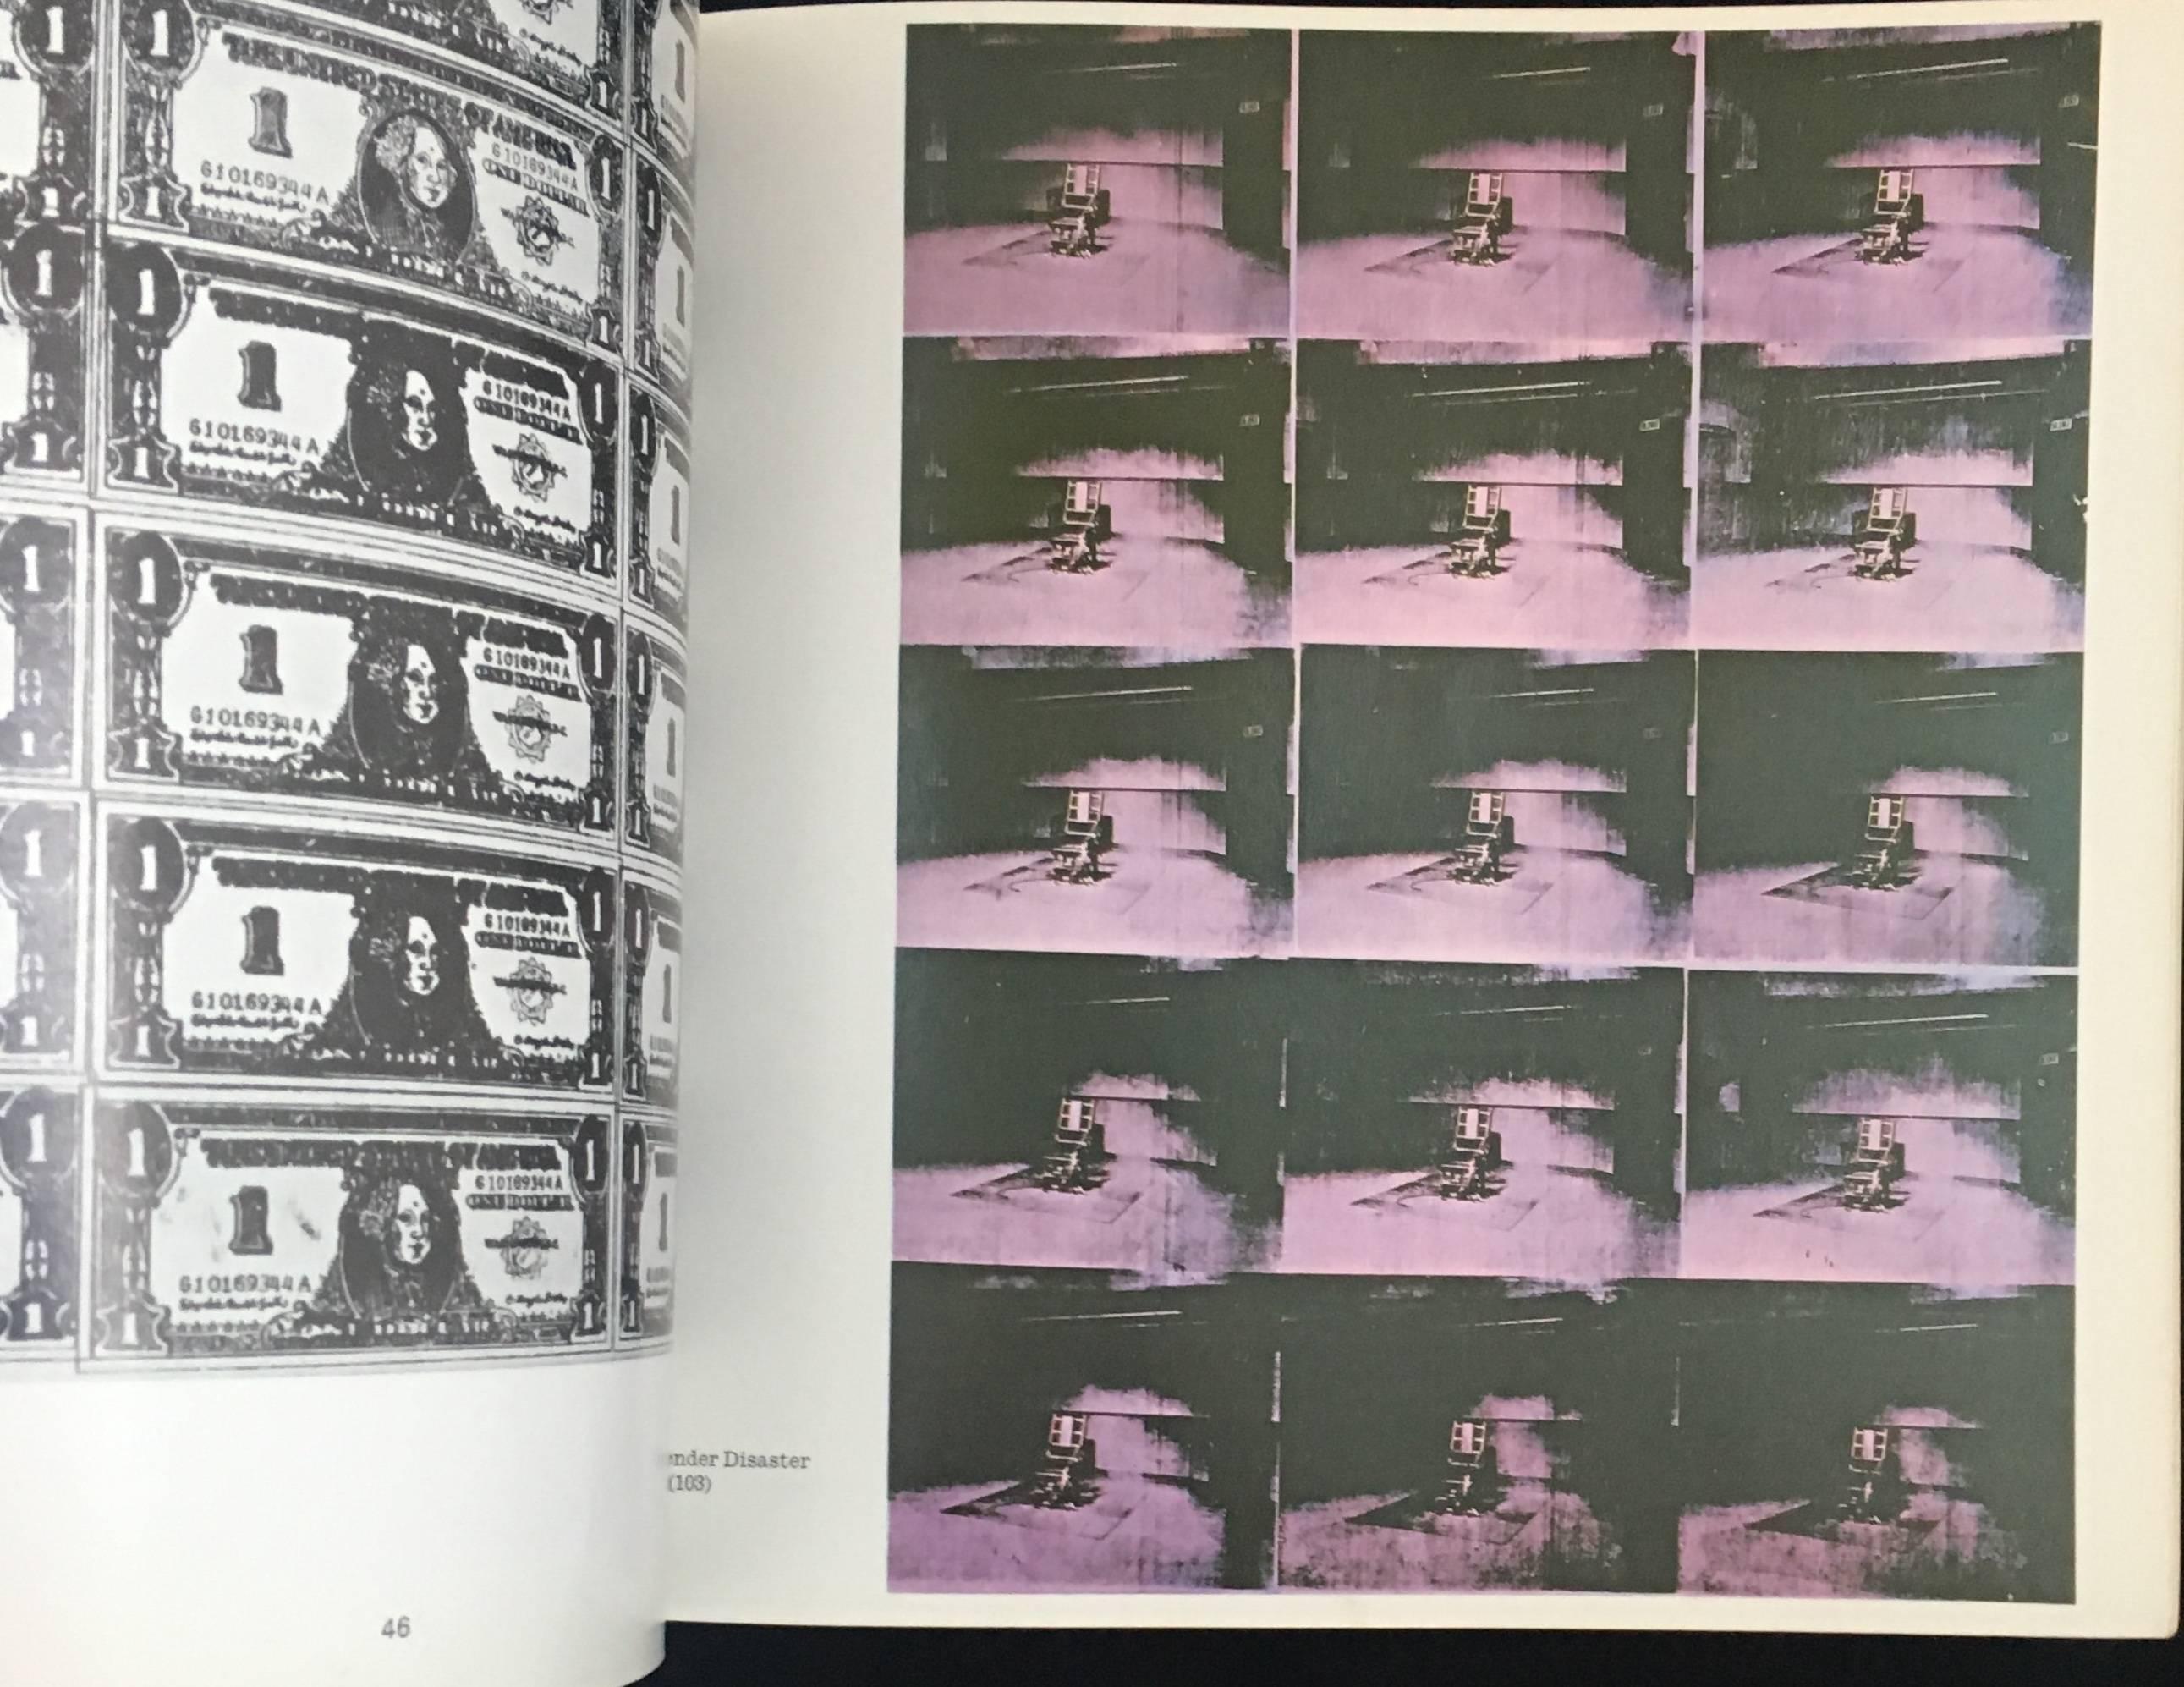 Original catalog for Andy Warhol's famed 1971 retrospective at Tate Gallery (London). A brilliant Marilyn (front) and Liz cover. 
Softcover. 100 pages. A relatively scarce, seminal Warhol exhibition catalog featuring a well illustrated array of key